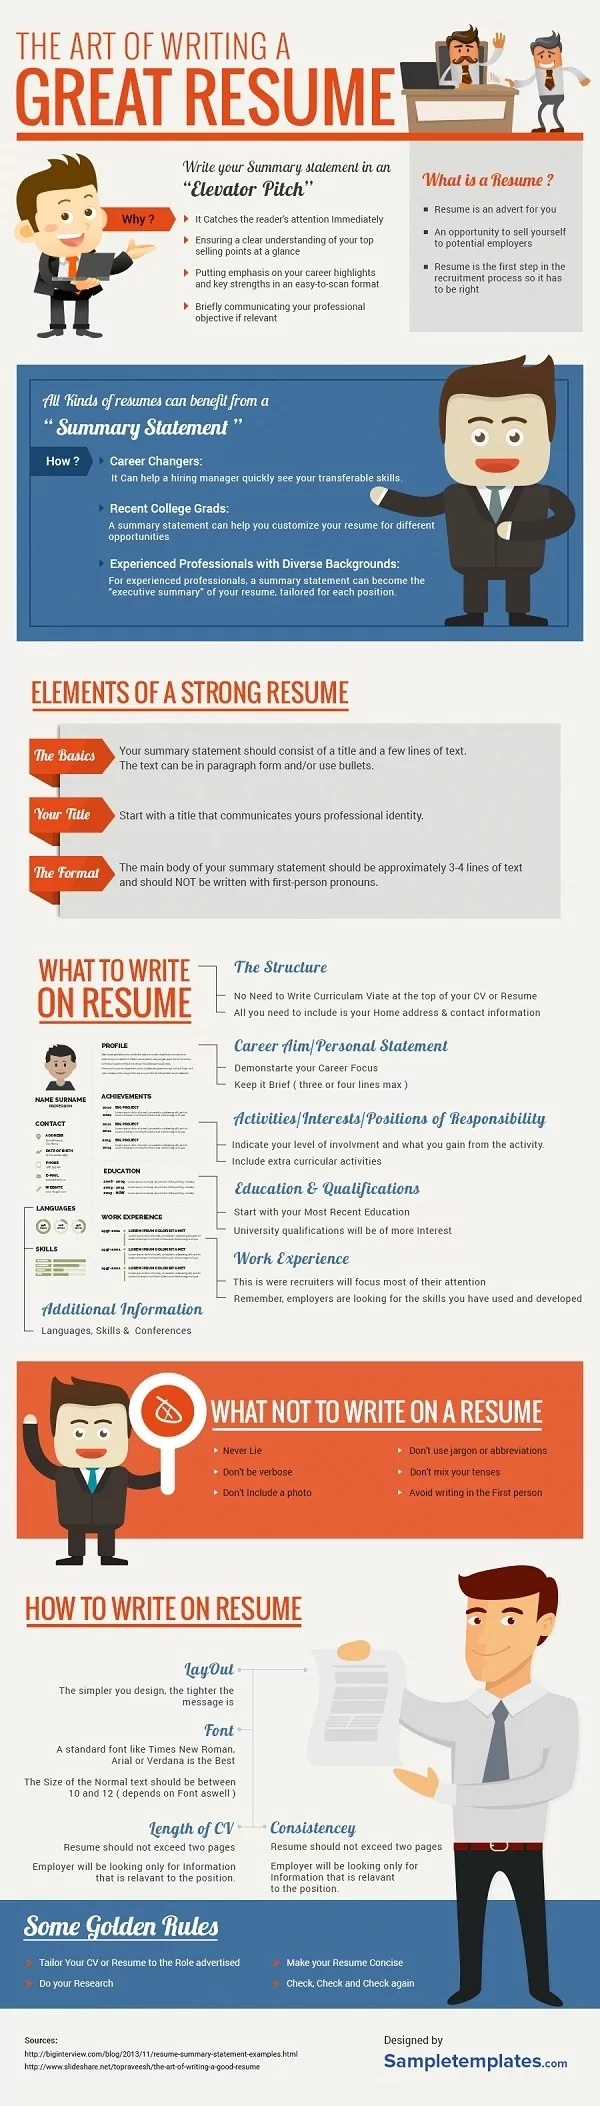 The Art of Writing a Great Resume